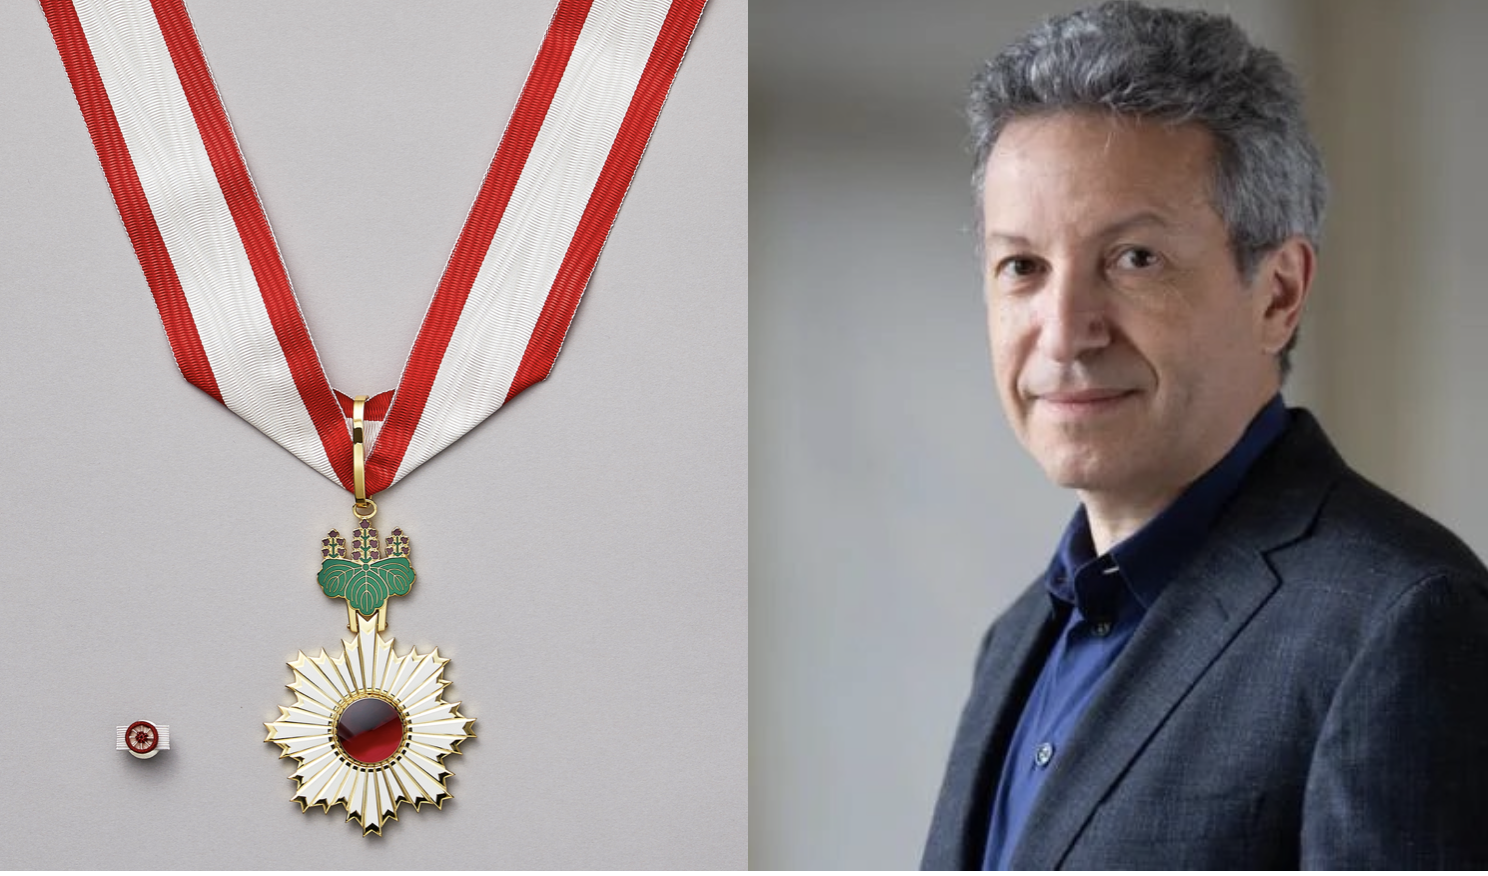 The Order of the Rising Sun Awarded to PER Executive Director David Weinstein